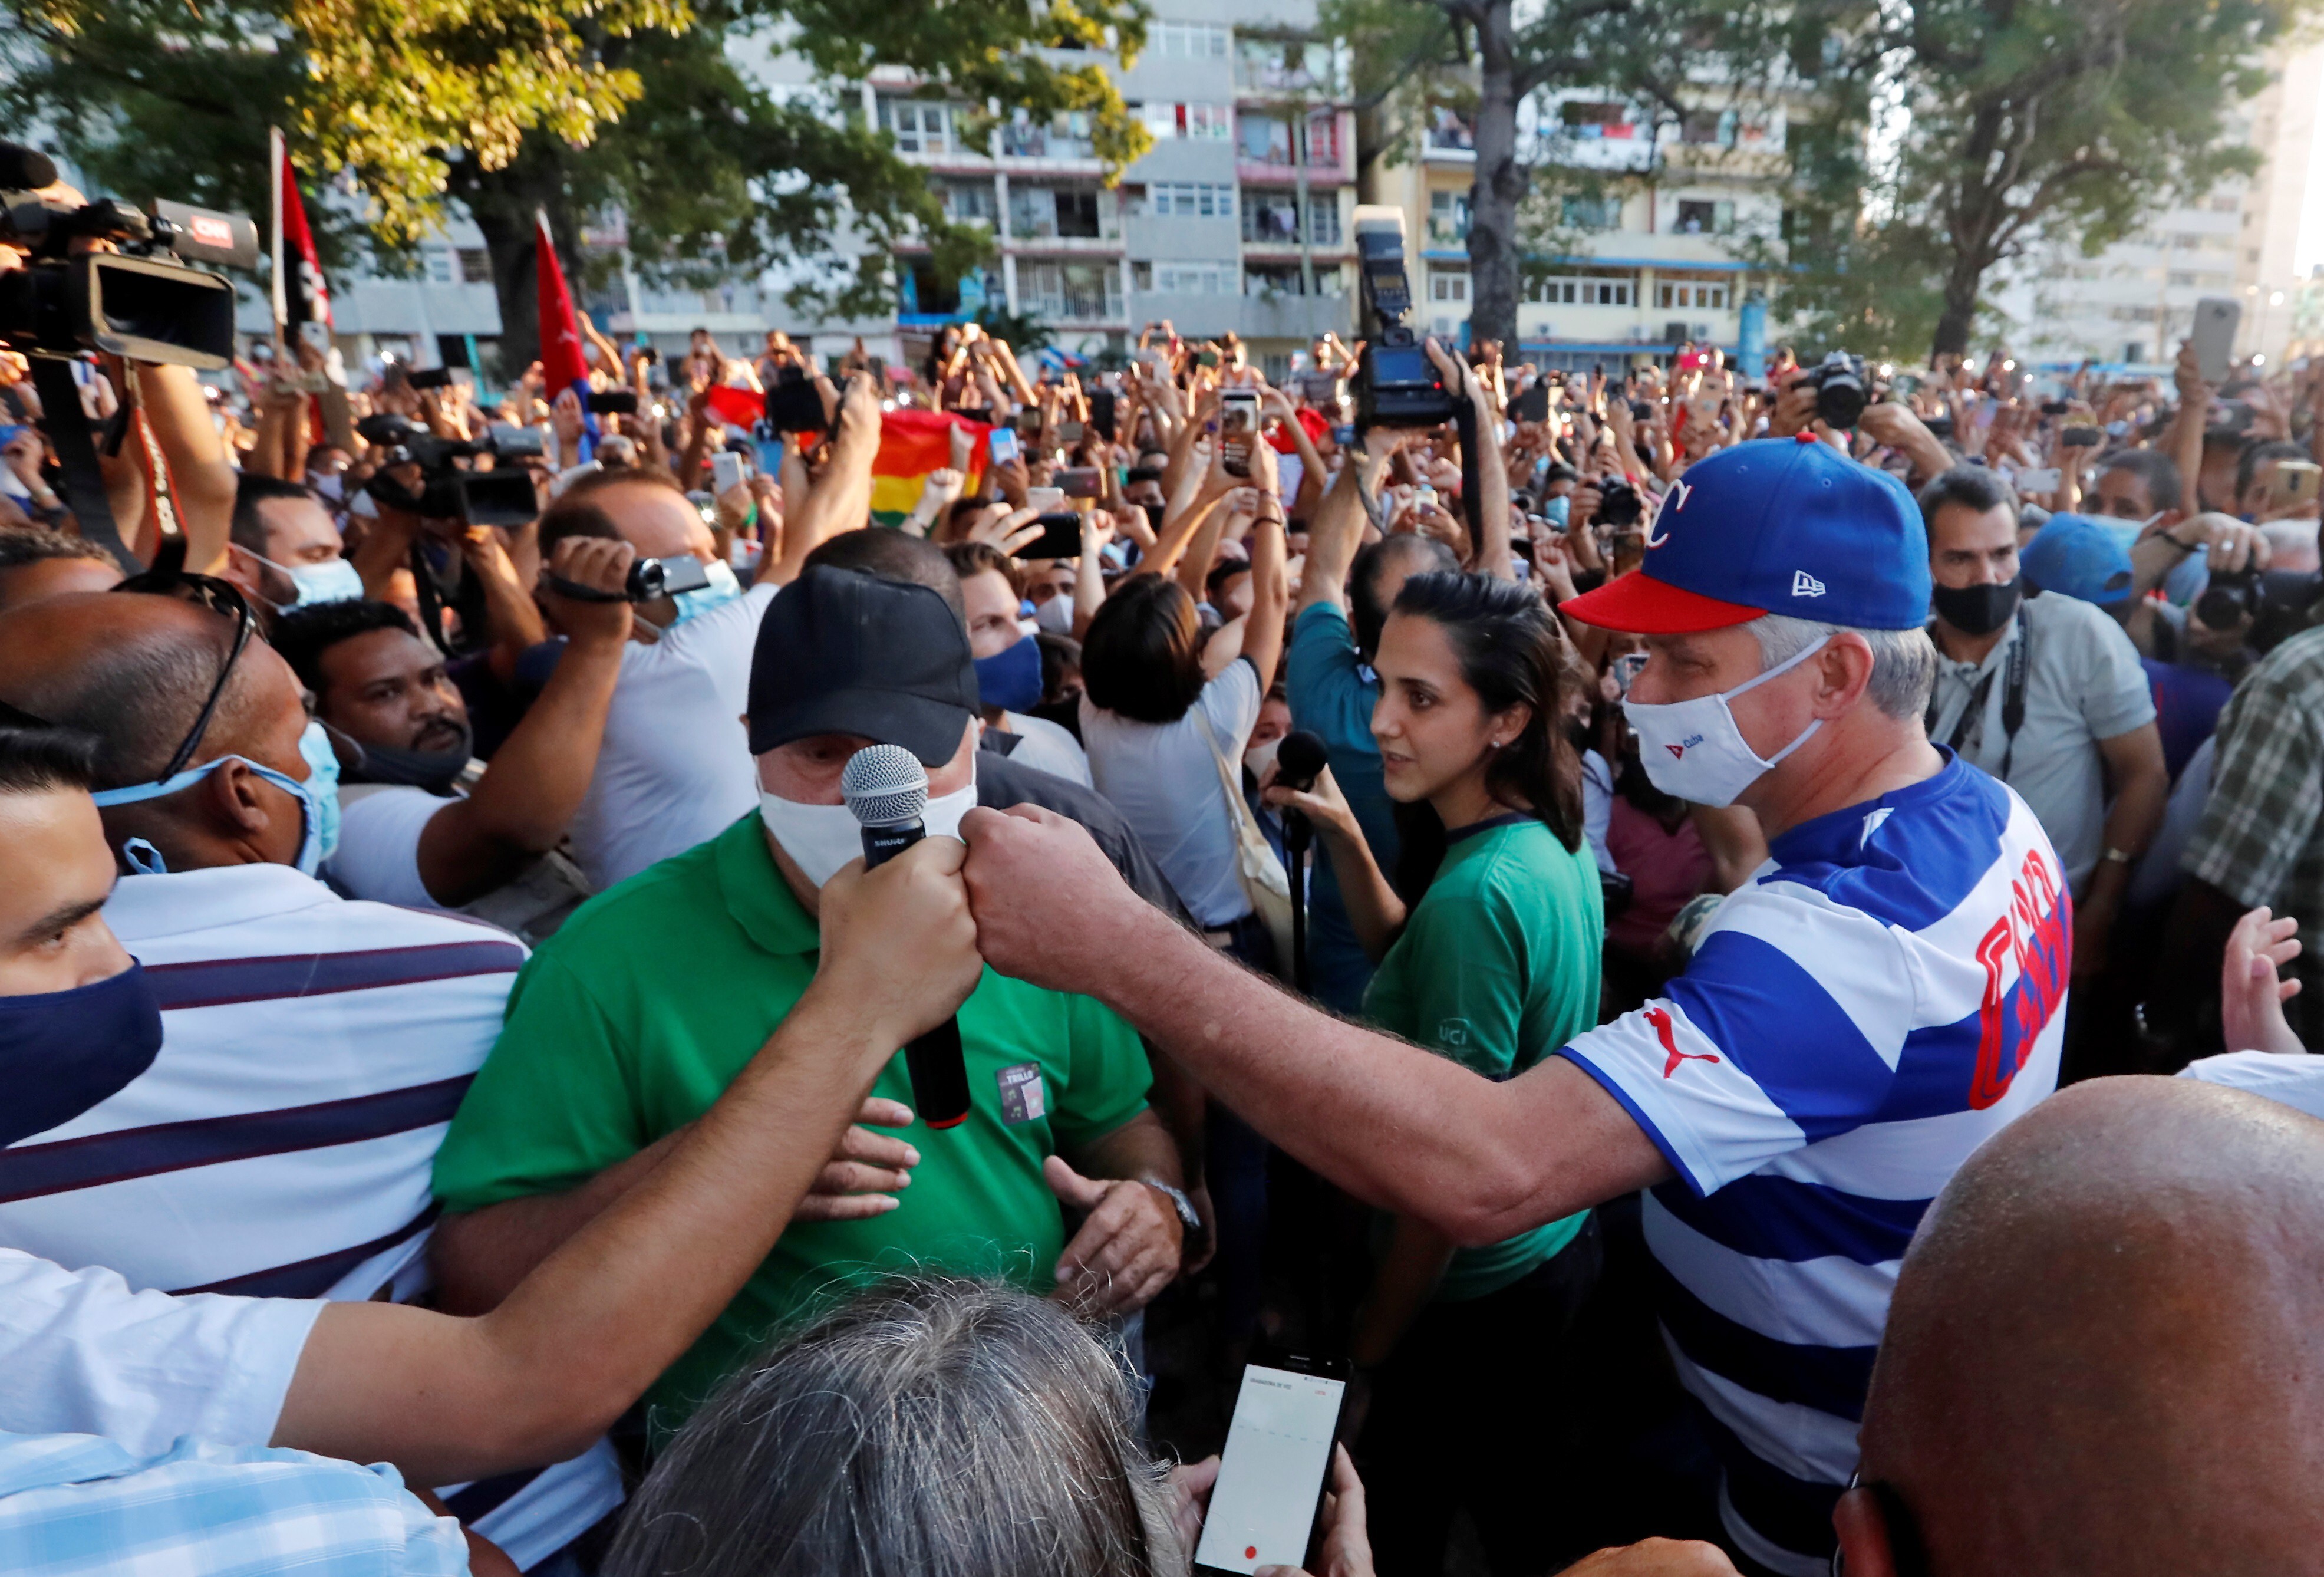 Cuban President Miguel Diaz-Canel, right, attends a concert in Havana organized by youth organizations to condemn the media campaign in support of the San Isidro movement, on November 29. Photo: EPA-EFE